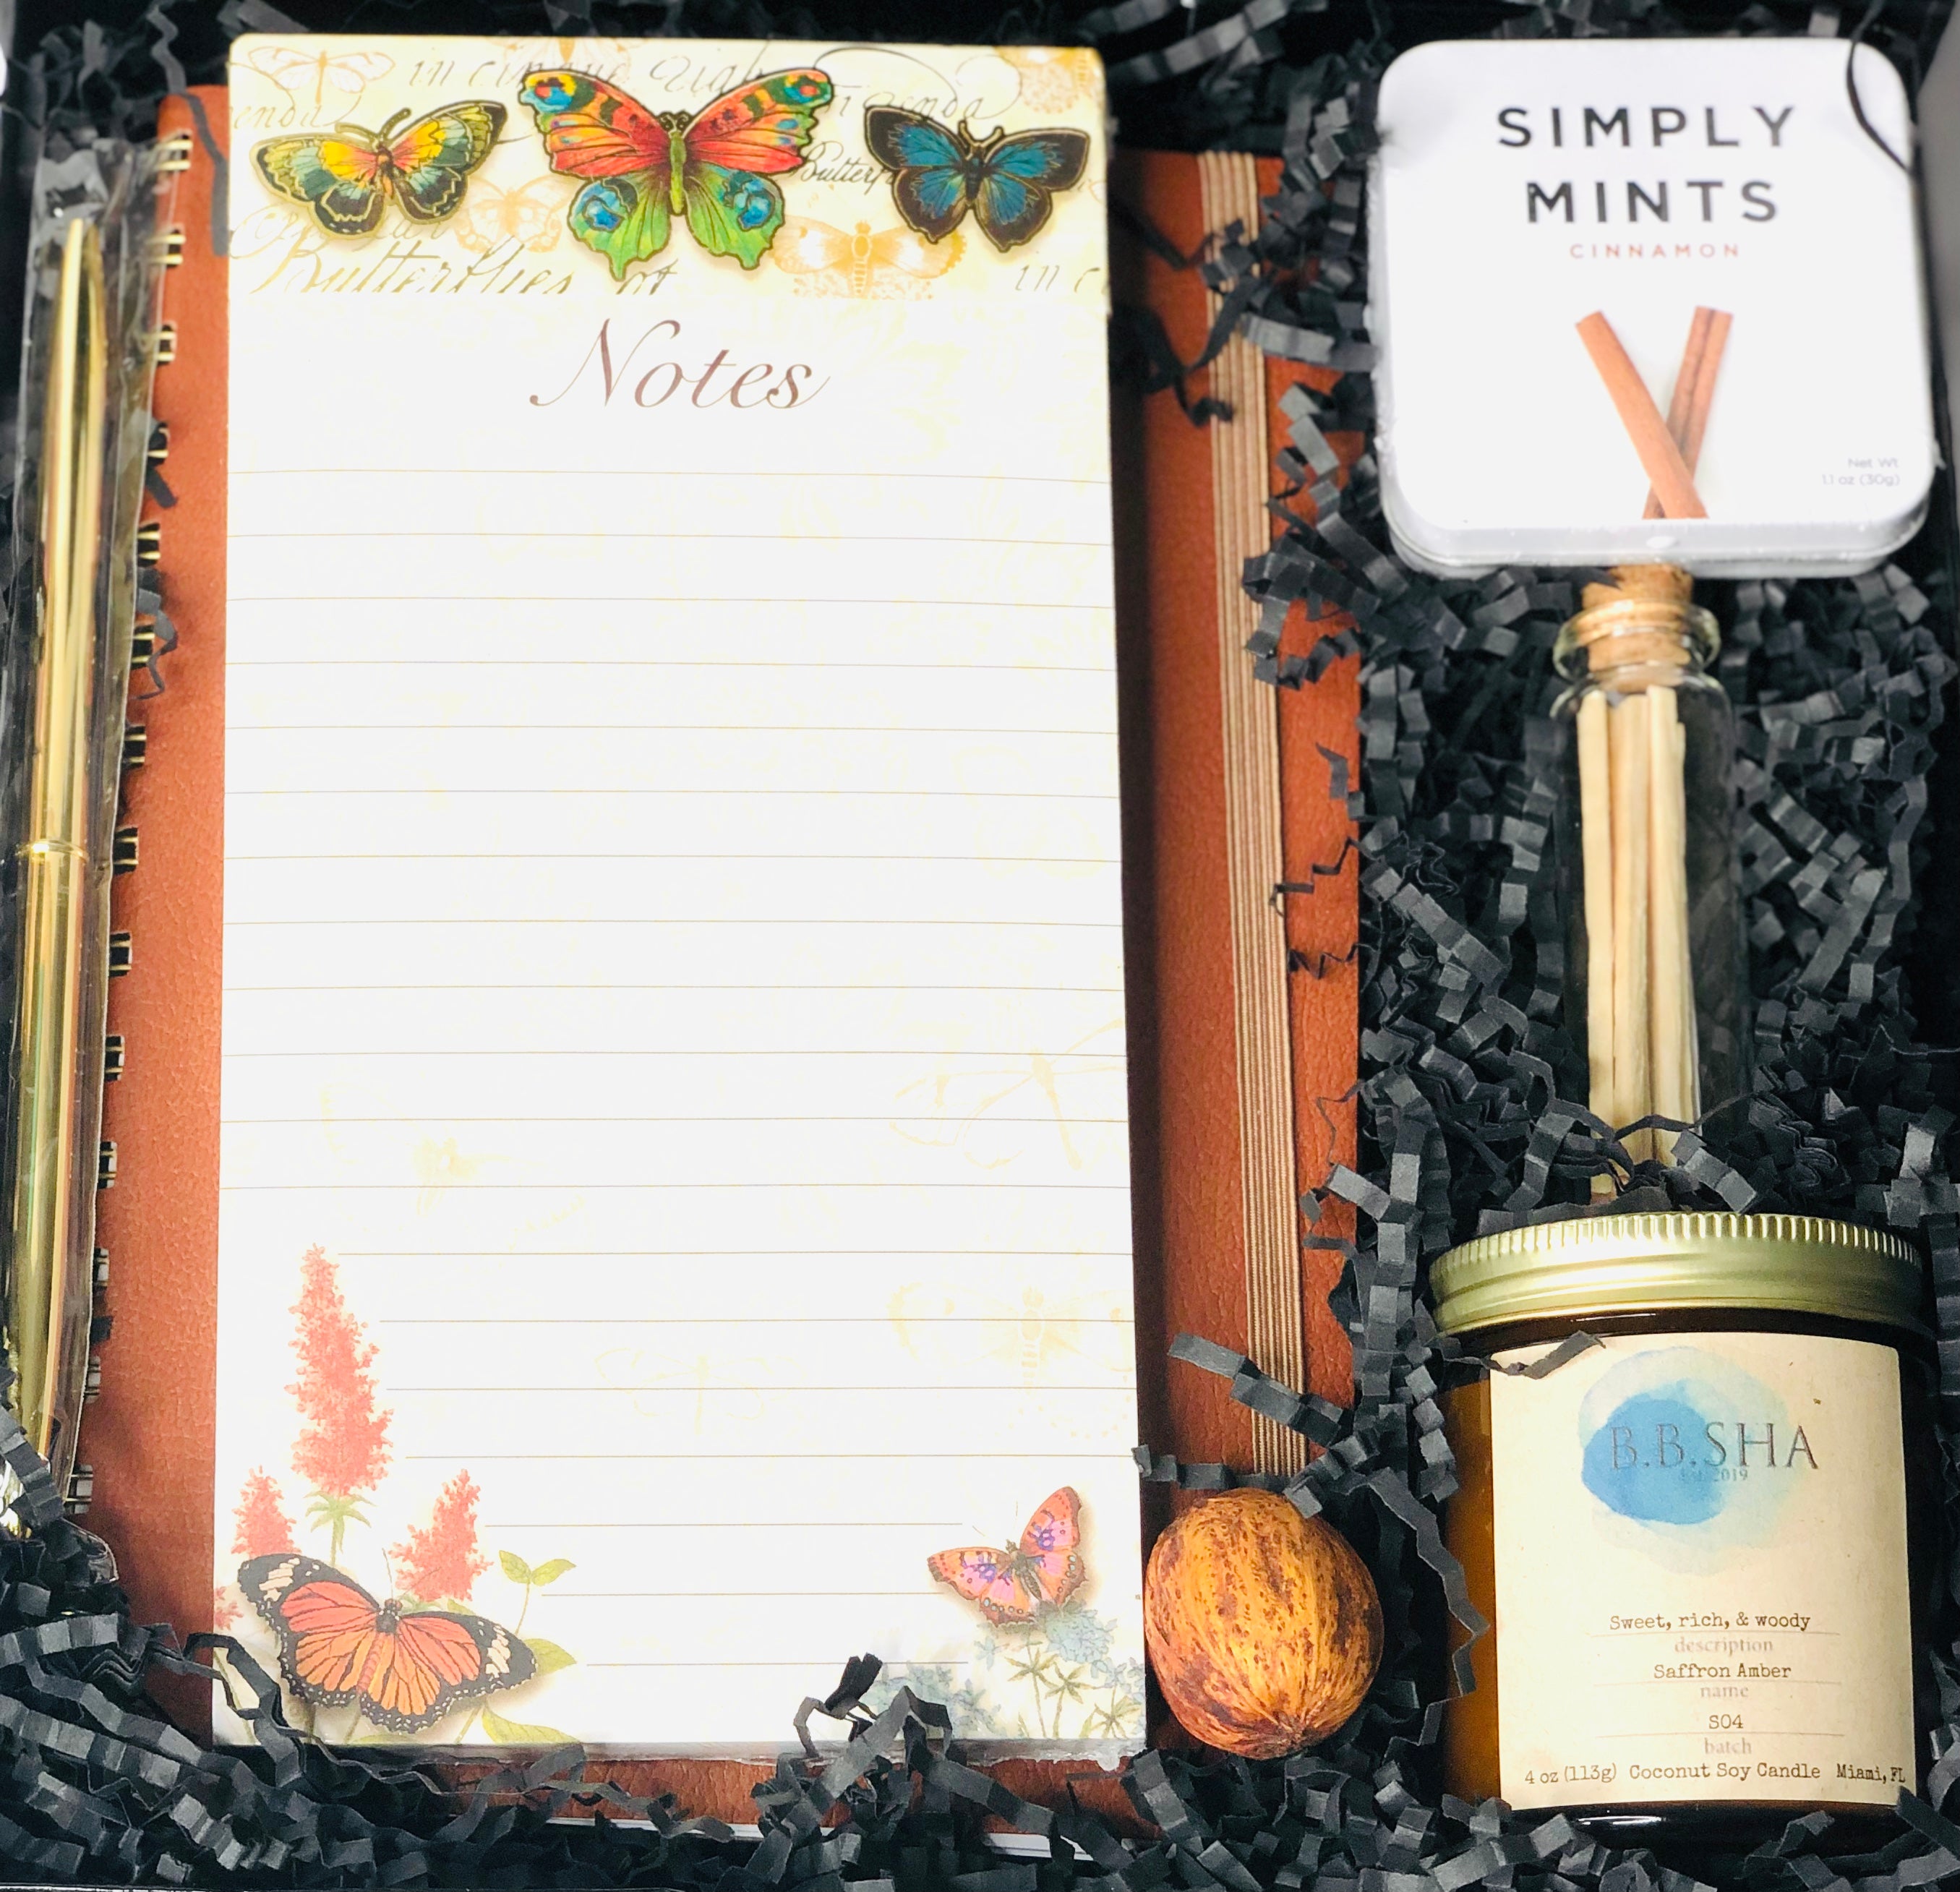 Butterfly Gift Box